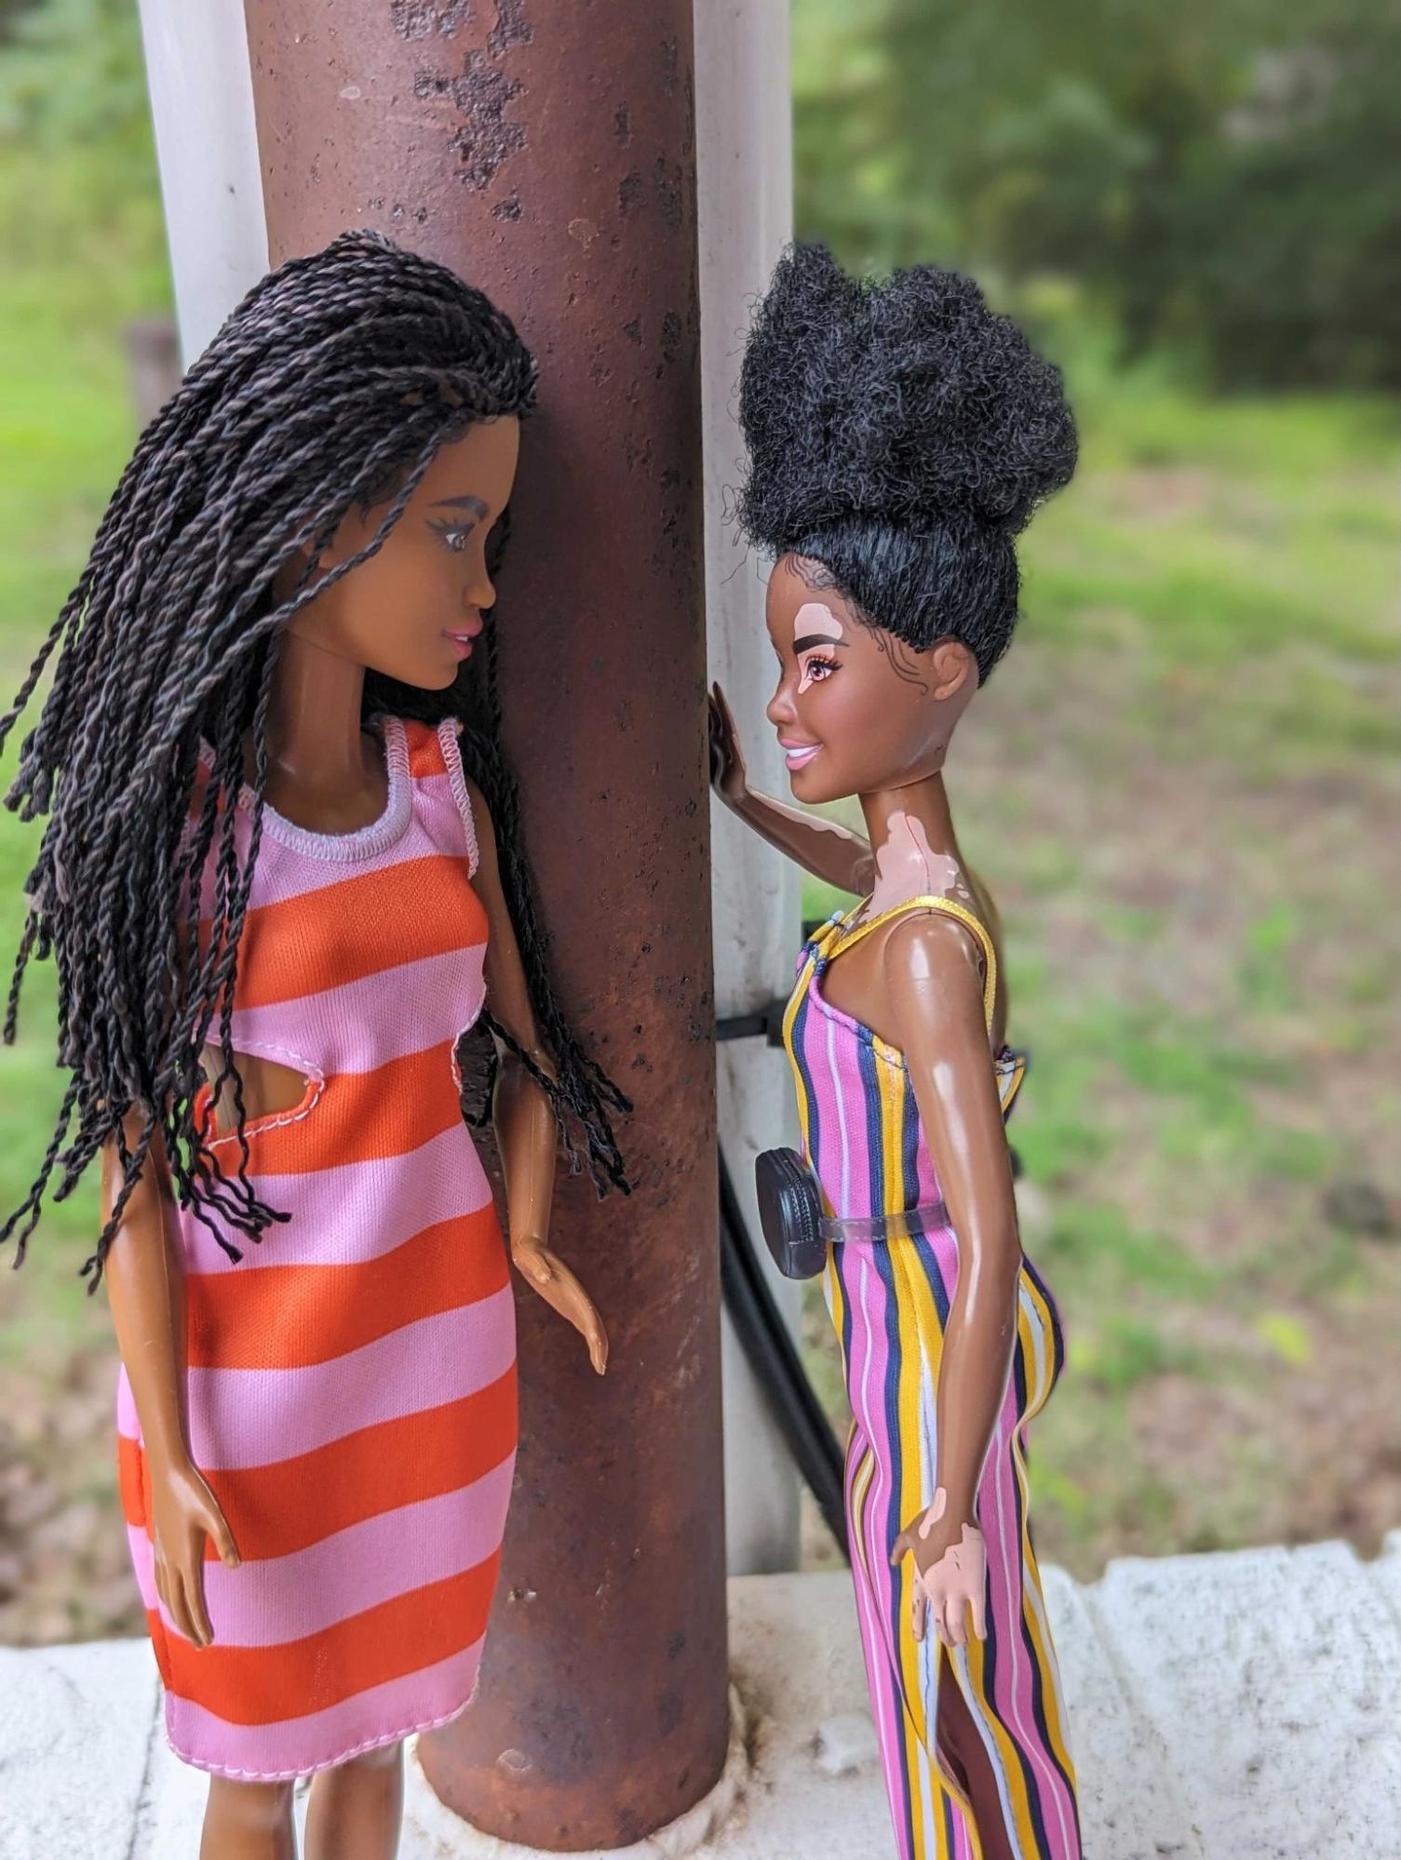 Mattel's New Barbies Aim To Change Stereotypes About Women In Film